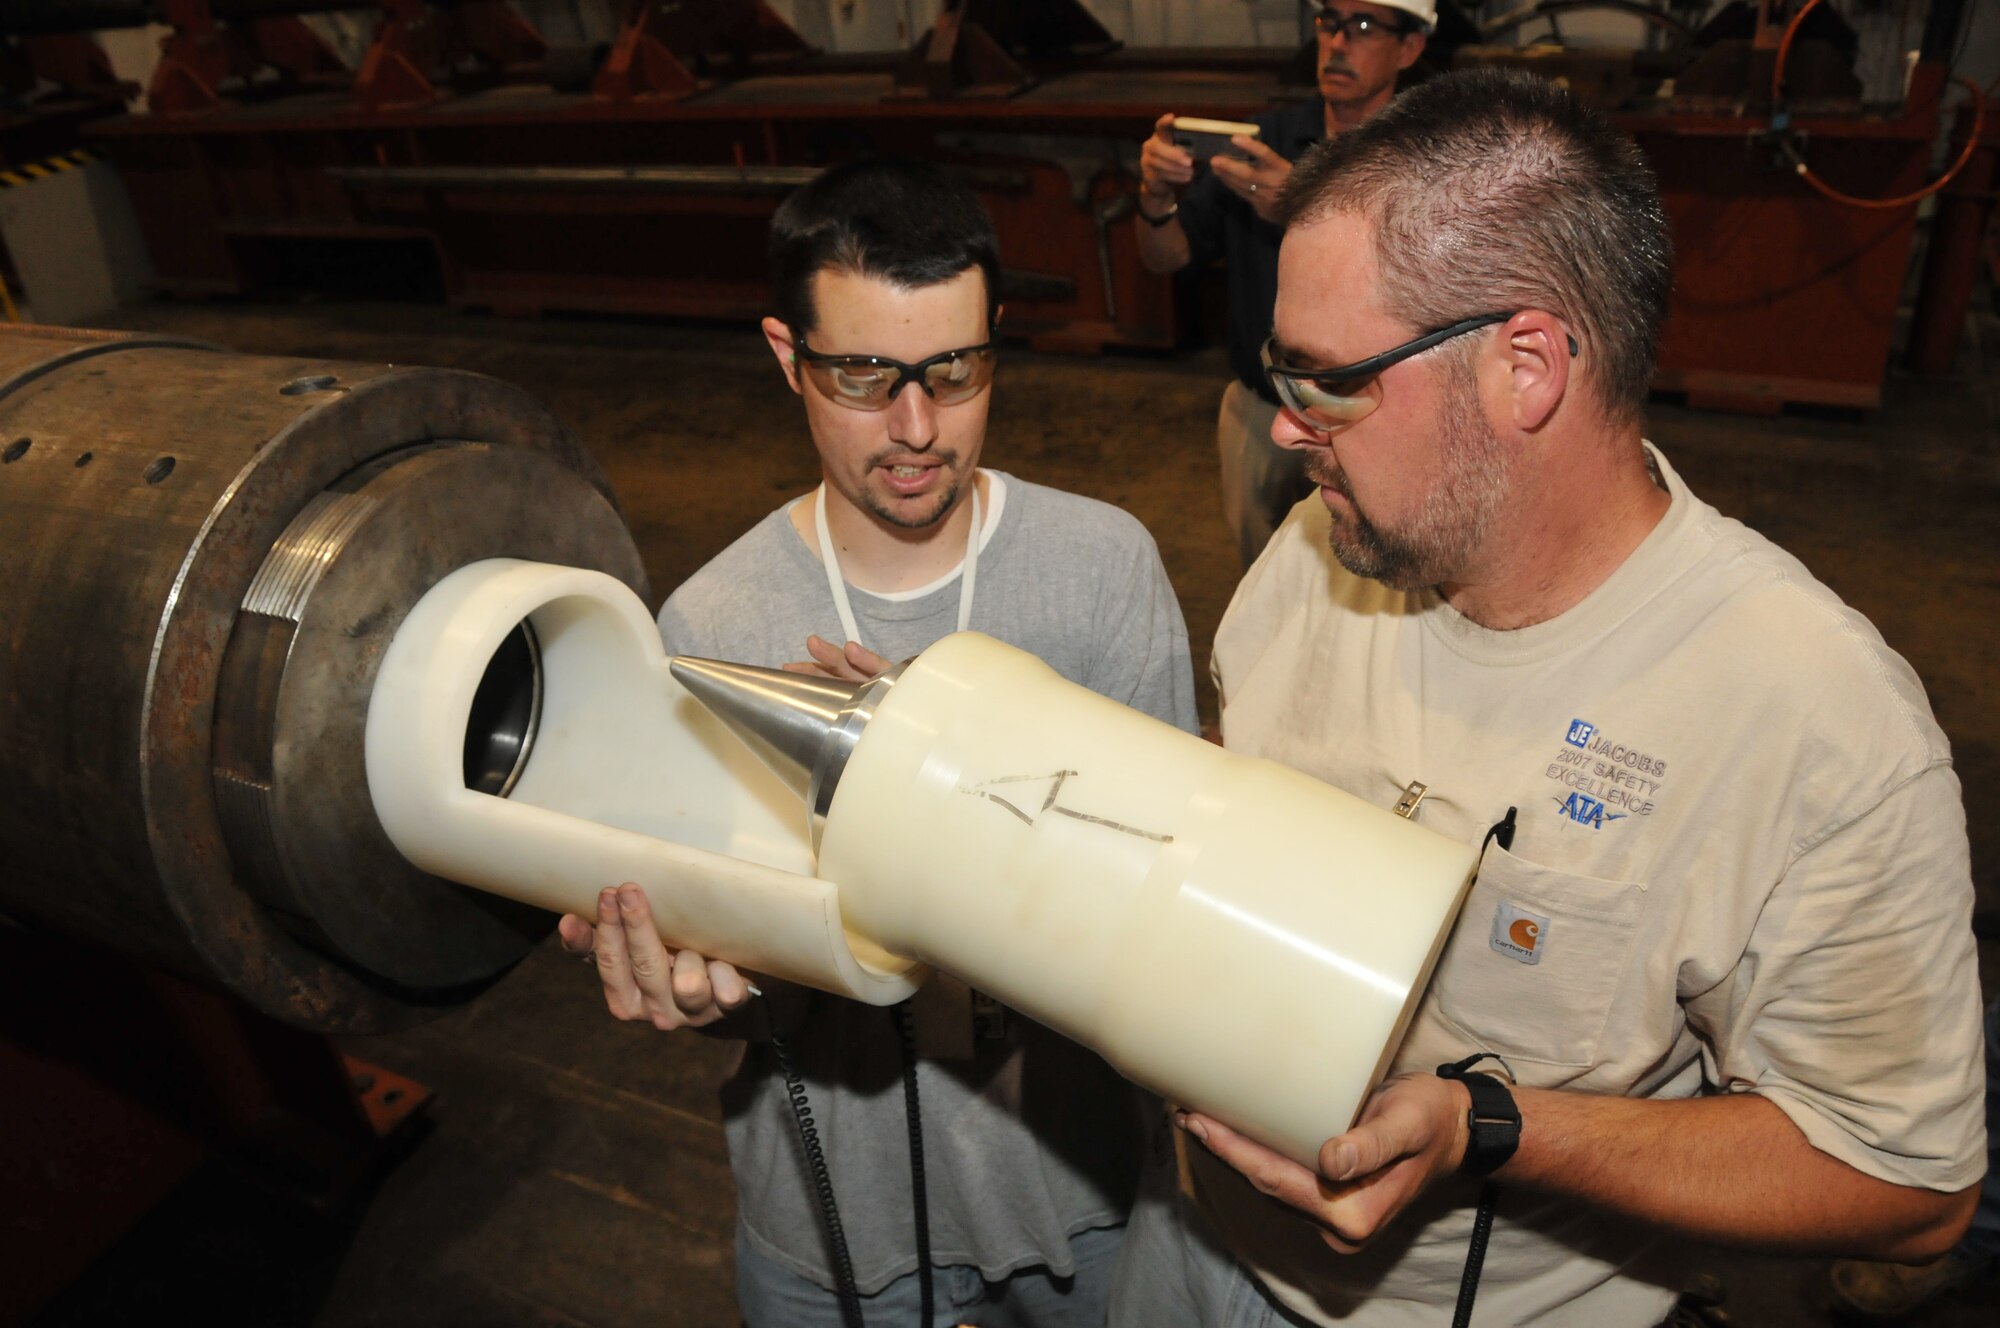 David Brown and Troy Perry, ATA outside machinists, install a slug projectile with a pitch motor installed into the 8-inch bore diameter barrel of AEDC’s Hypervelocity Range G’s launcher. This projectile will be launched out of the G Range two-stage light gas gun at a velocity of 8,200 feet per second.  This is the first test of a new rocket motor that will be used to pitch the Terminal High Altitude Area Defense (THAAD) projectile up to a predetermined angle prior to impacting simulated threat targets. The primary objective of this shot is to verify pitch motor ignition and performance. (Photo by David Housch)
